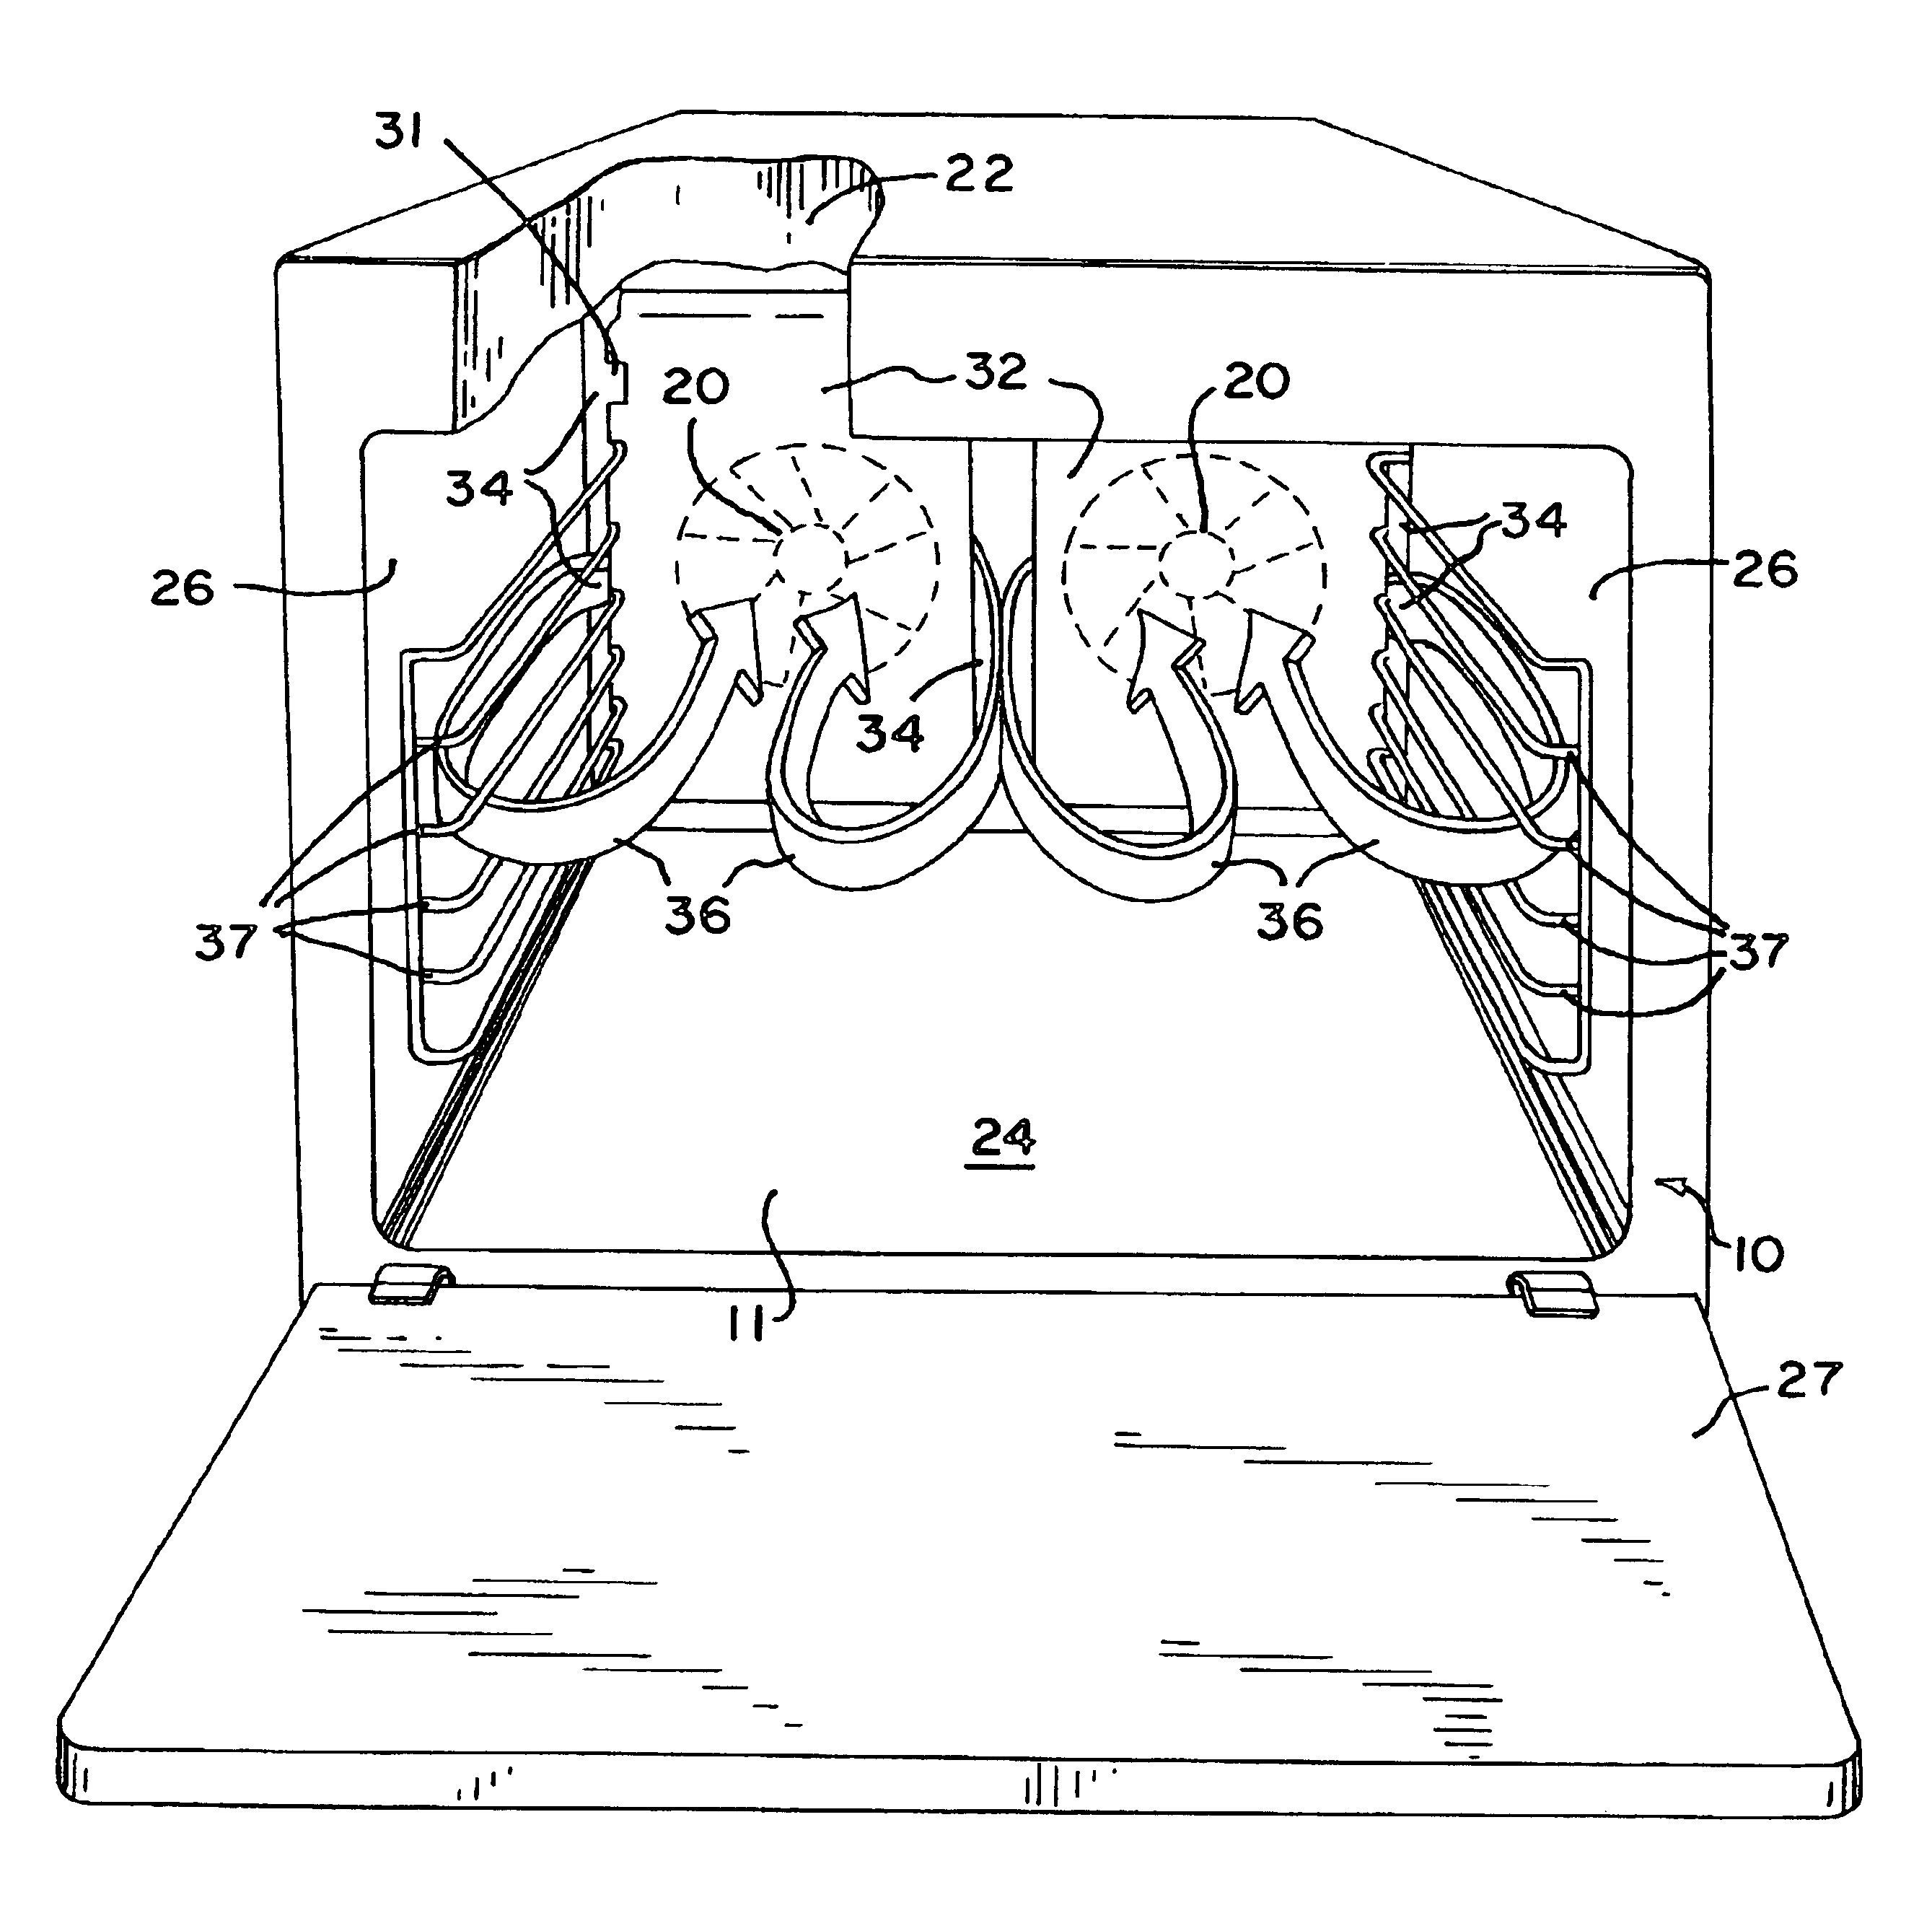 Convection oven with forced airflow circulation zones